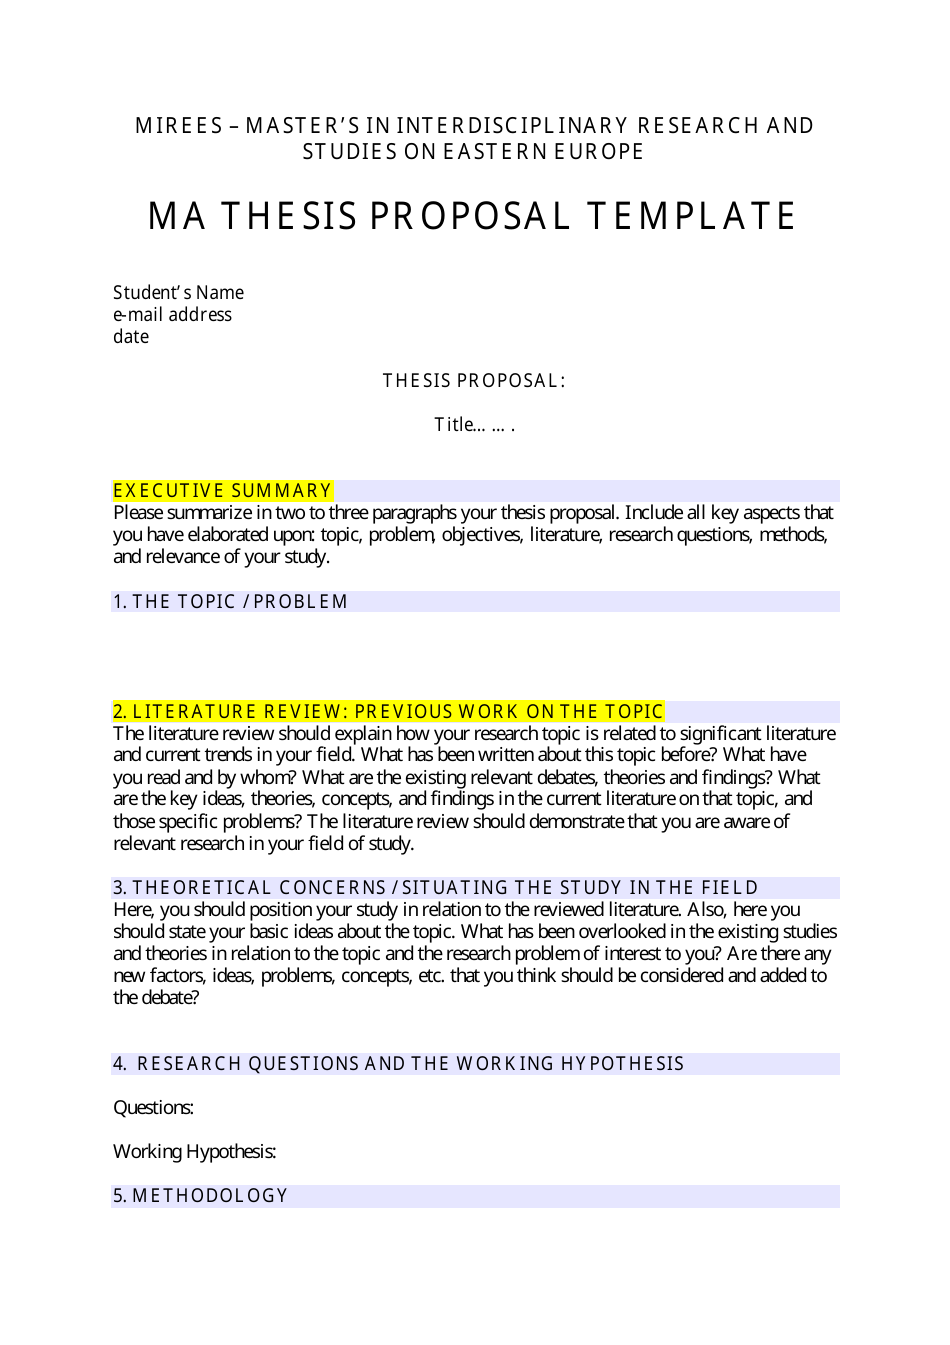 Ma Thesis Proposal Template - Interdisciplinary Research and With Debate Notes Template